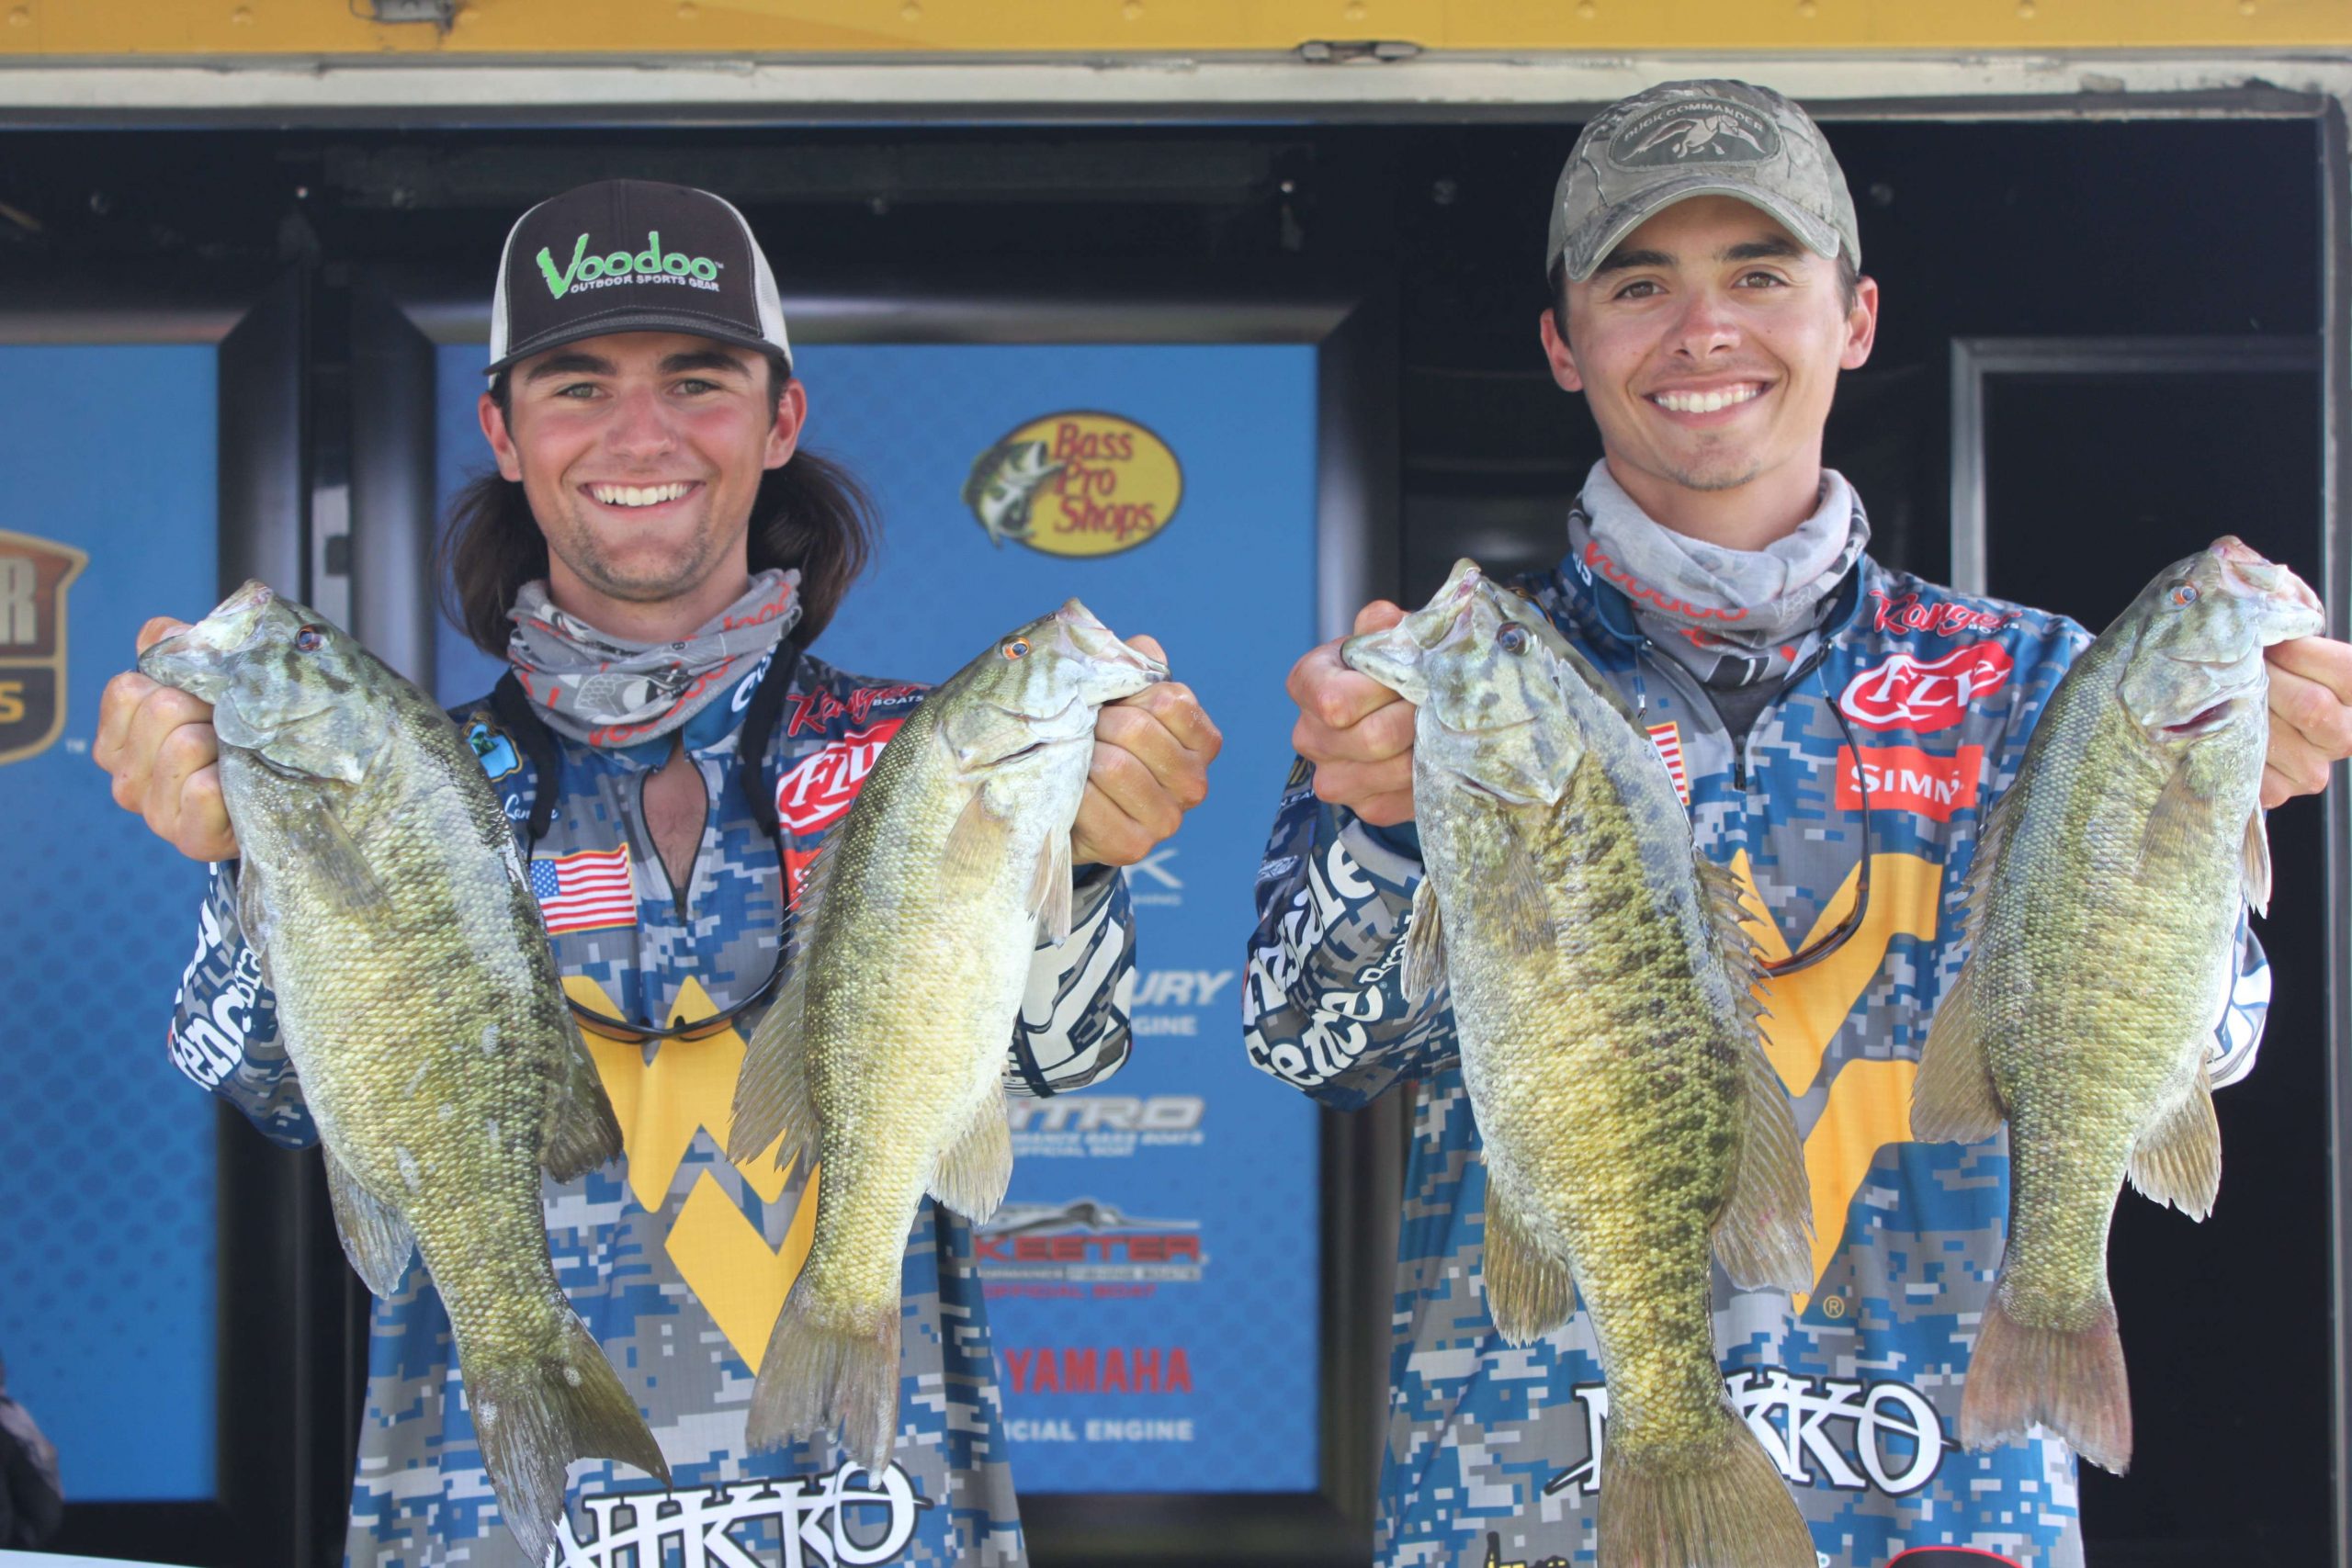 Nolan Minor and Casey Lanier of West Virginia just missed the cut to 32. They finished 35th overall with 23-11.